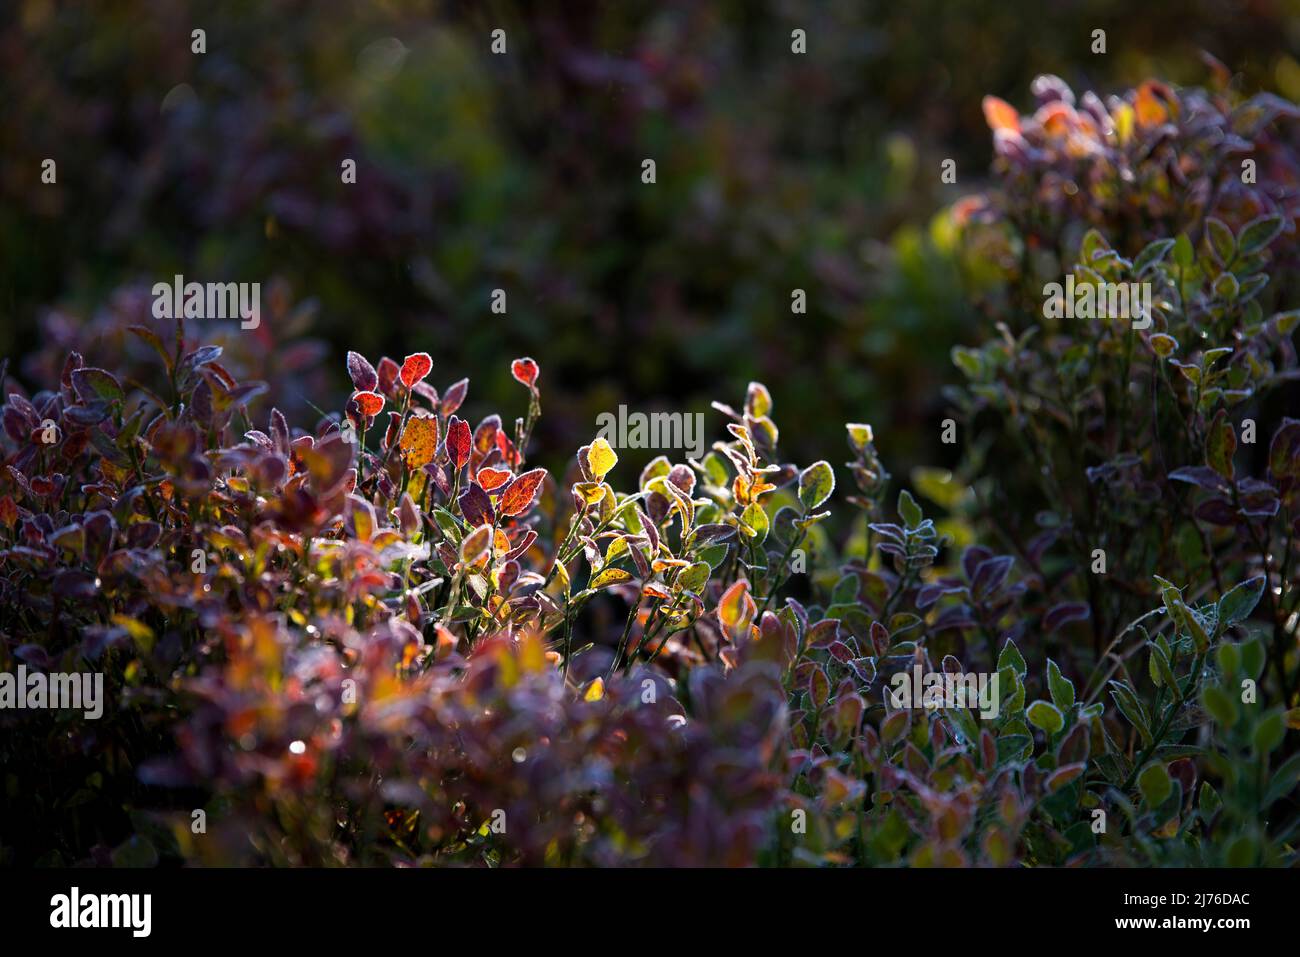 Blueberry bushes in autumn leaves, ripened leaves in backlight, France, Vosges Mountains Stock Photo